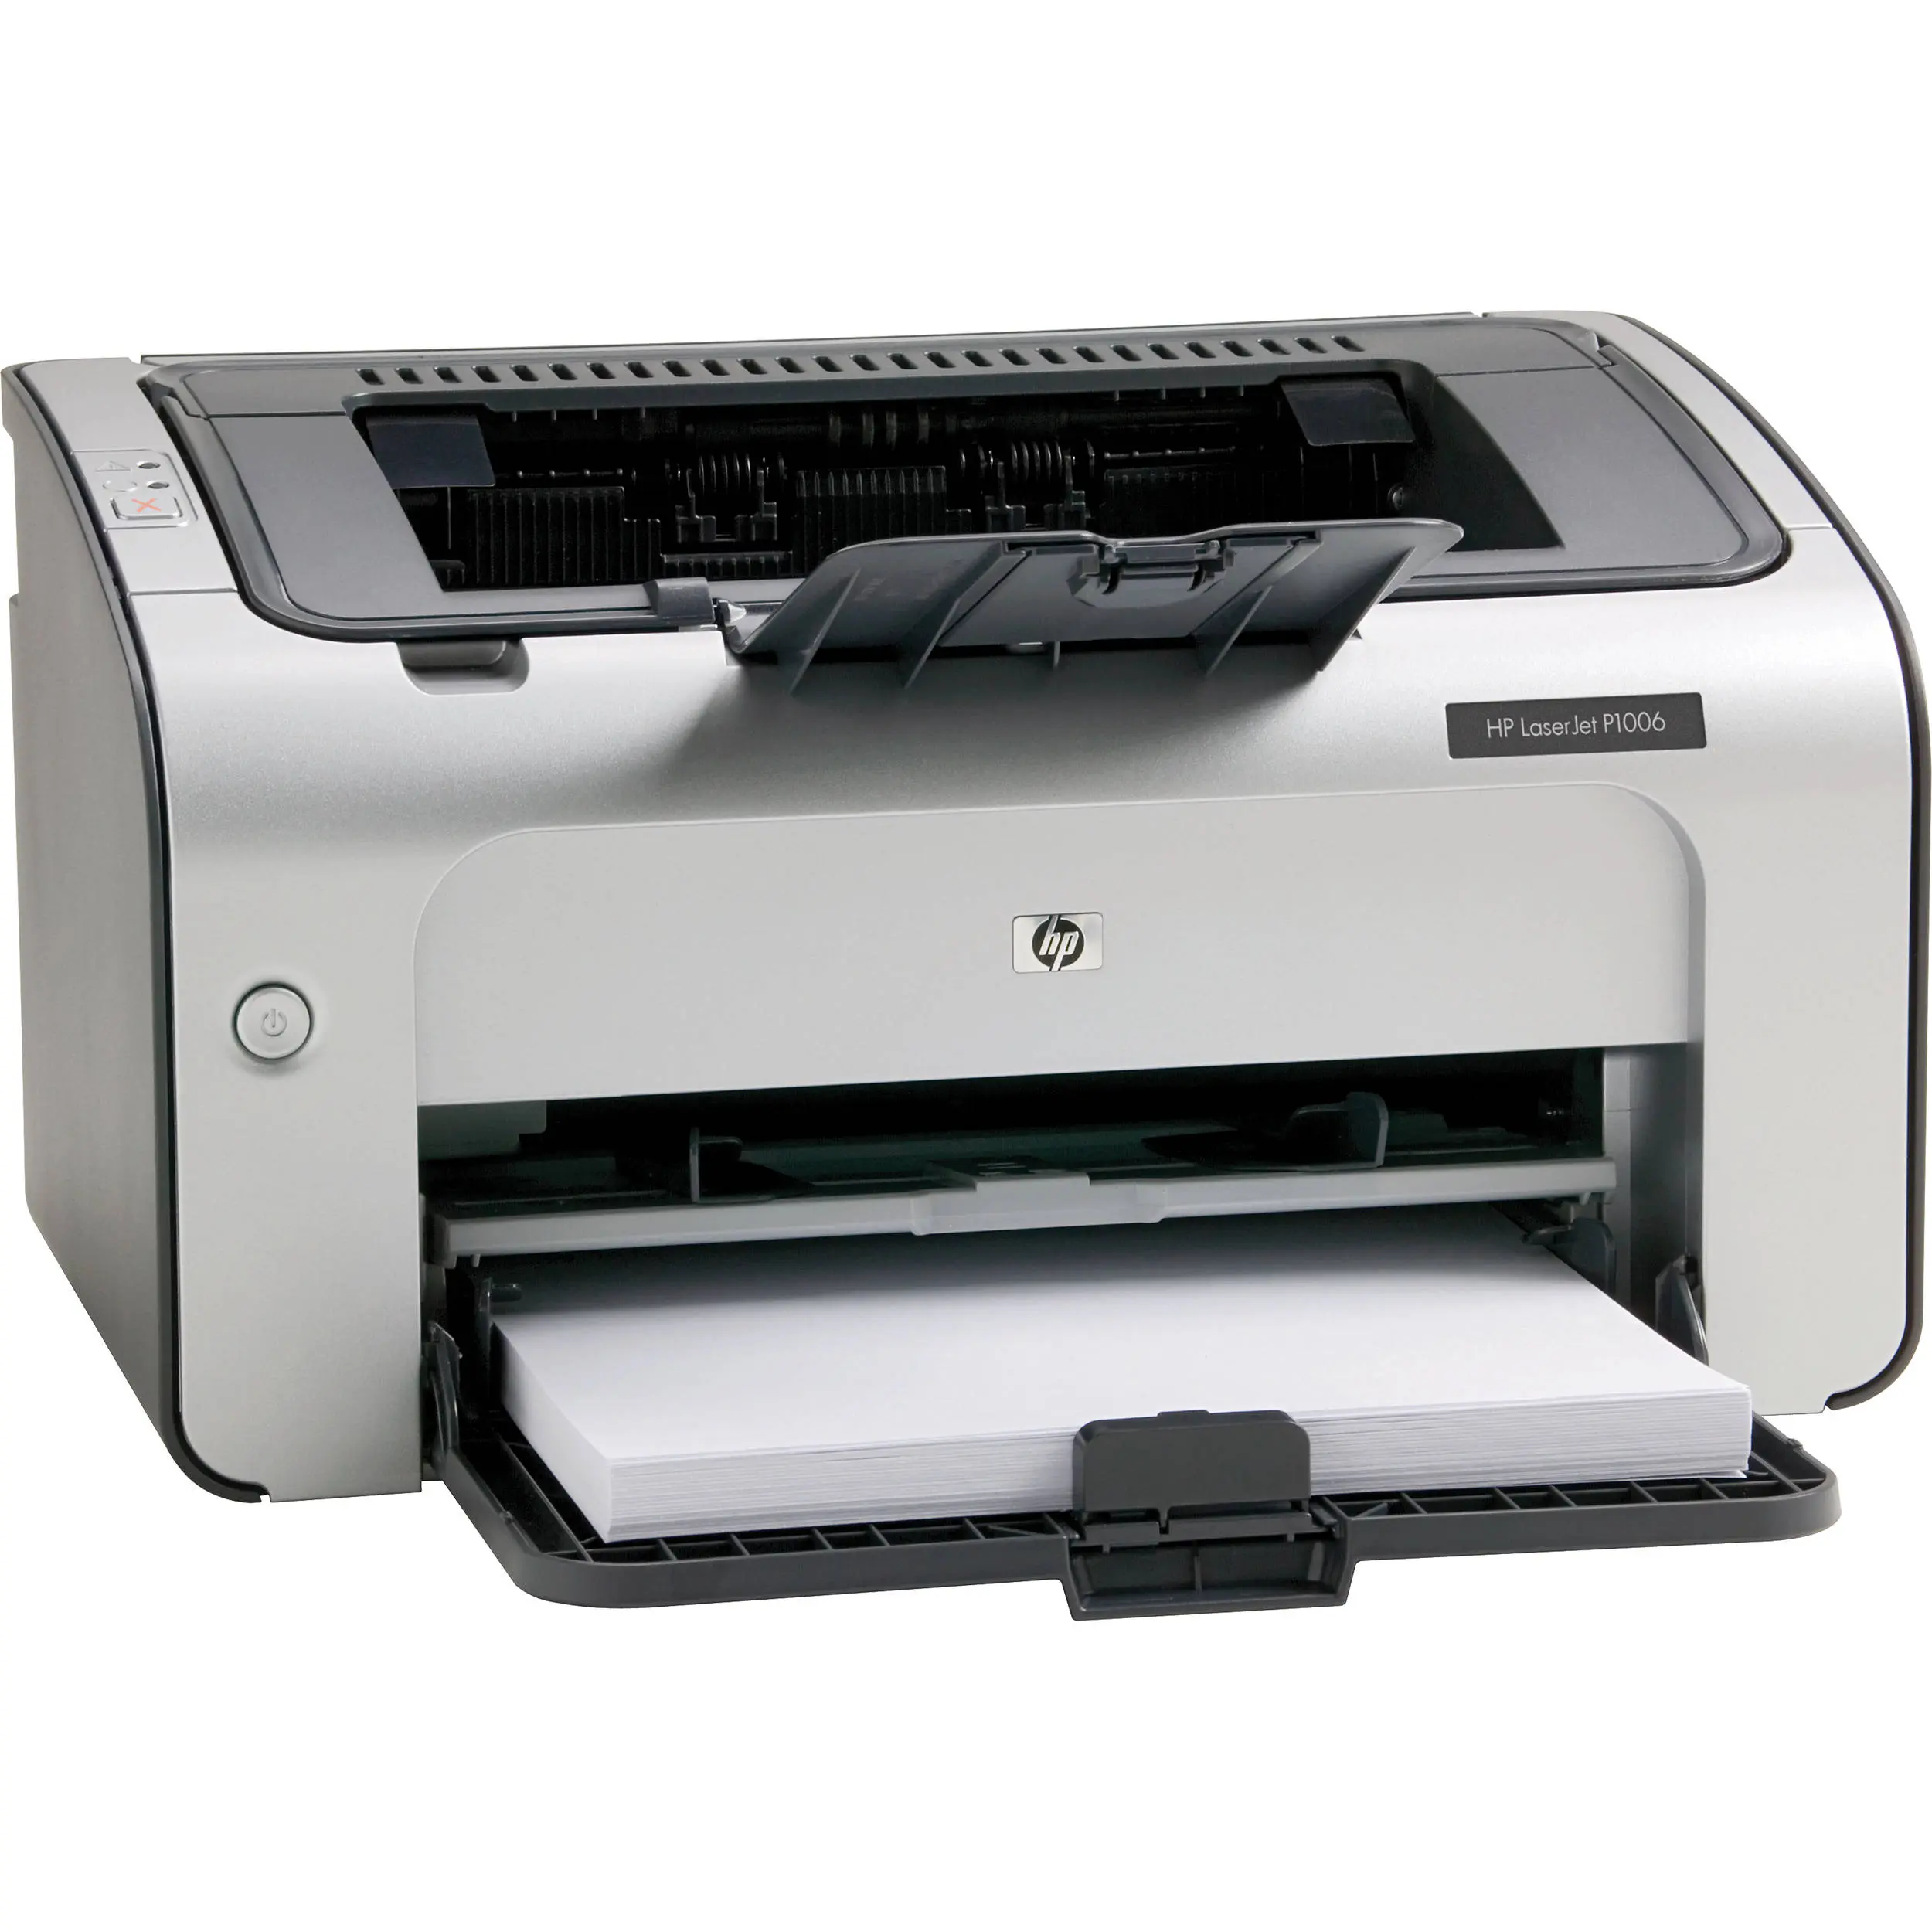 Hp laserjet p1006 driver: enhancing your printing experience